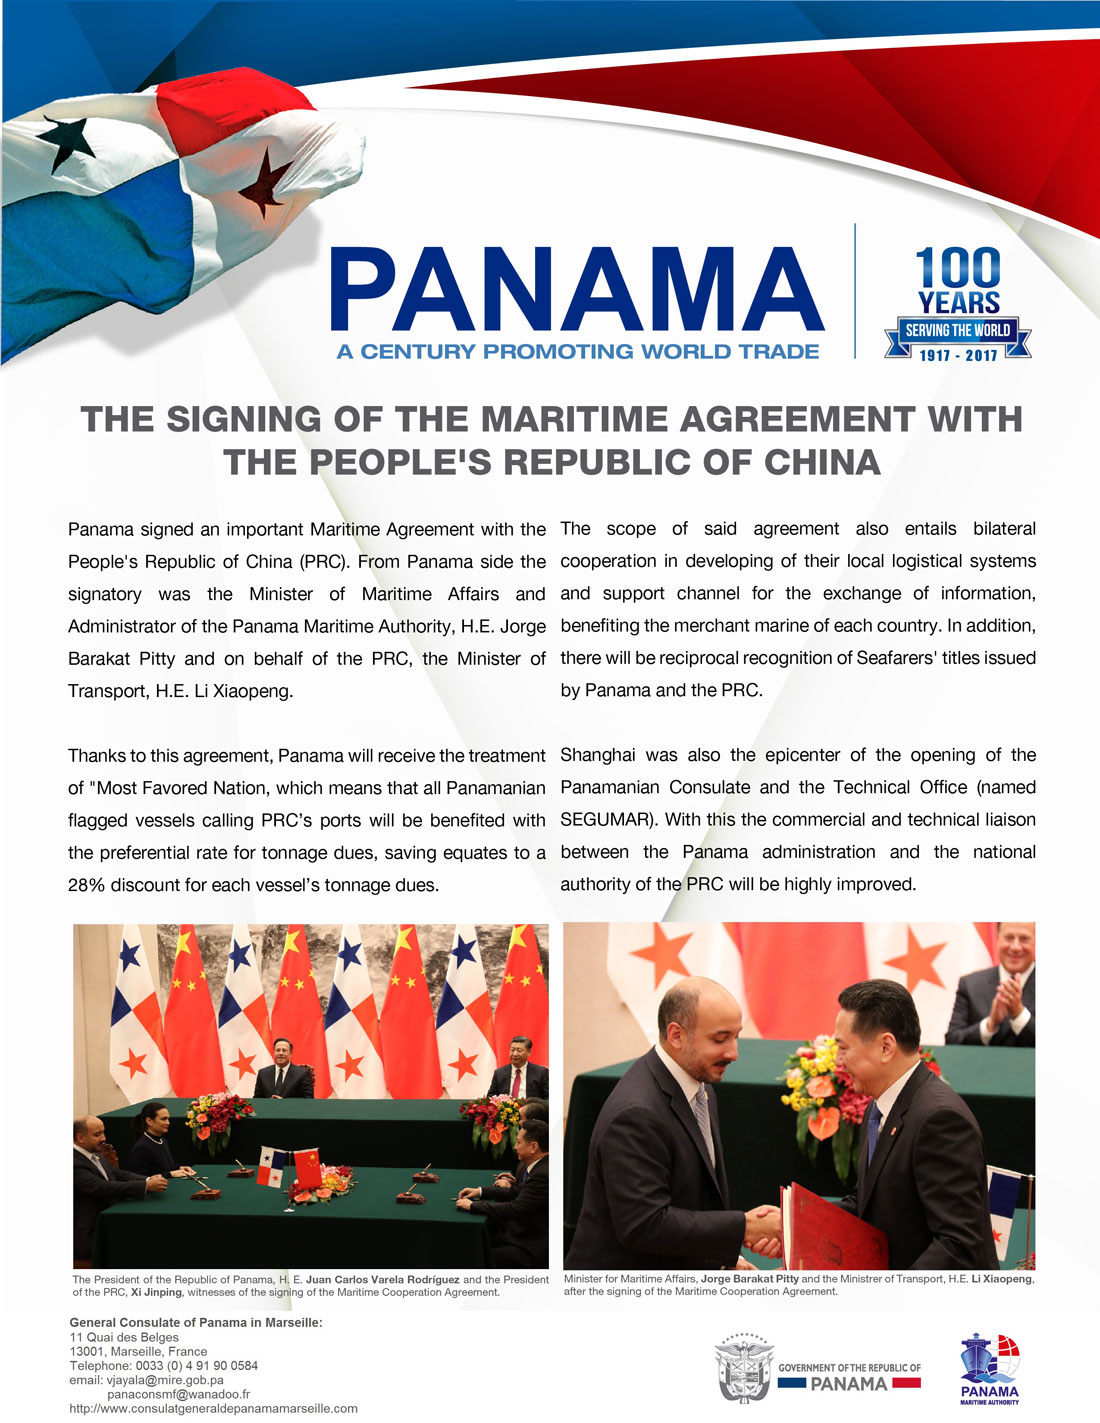 The Signing of the maritime agreement with the People's Republic of China